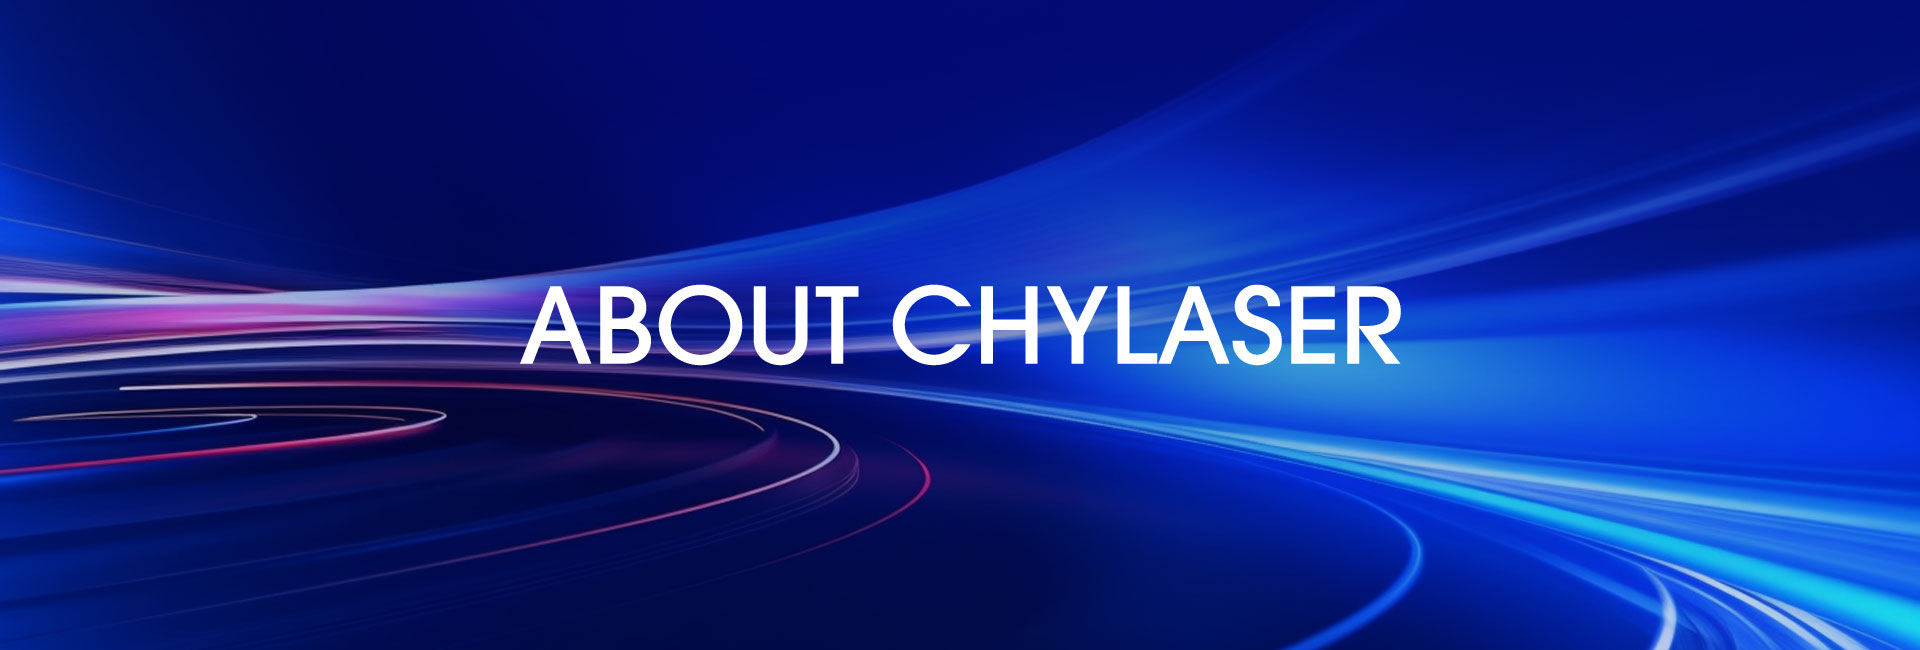 About Chylaser